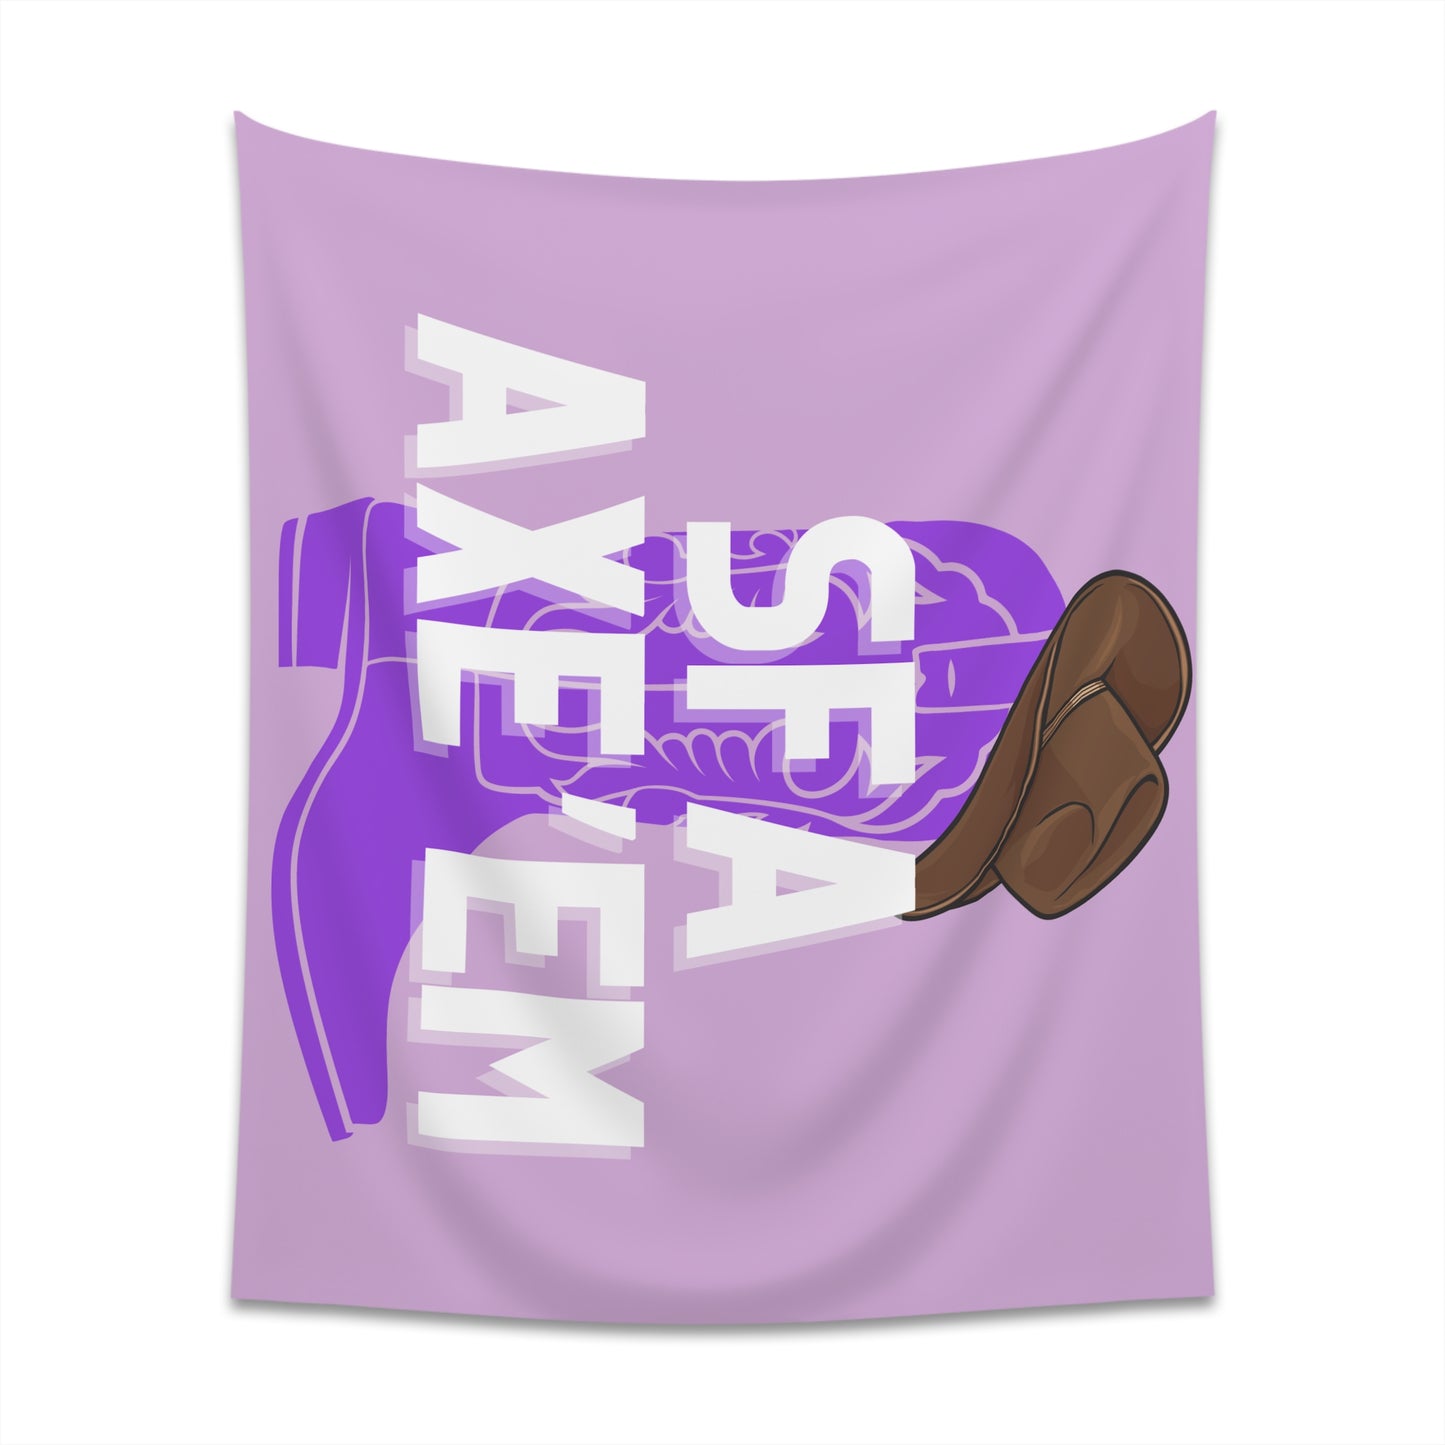 "AXE 'EM " Printed Wall Tapestry